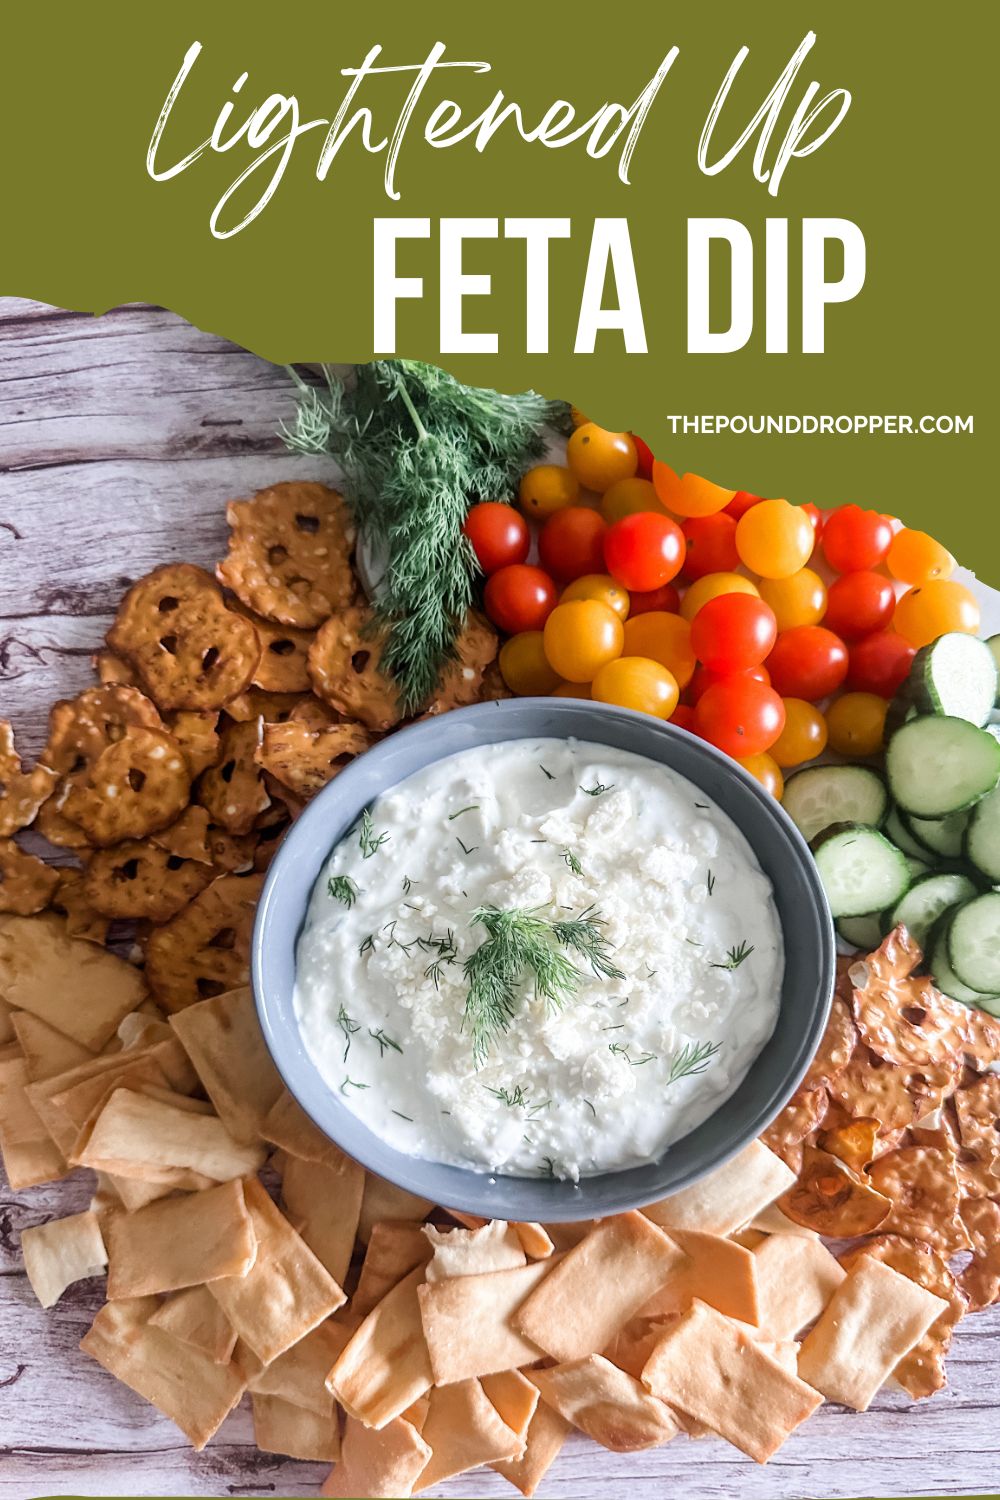 This Lightened Up Greek Feta Dip is one of the easiest dips you’ll ever make! It's loaded with feta, greek yogurt, light cream cheese, and fresh dill. This dip comes together in just 5 minutes! Serve it with veggies, pita chips or your favorite crackers! via @pounddropper